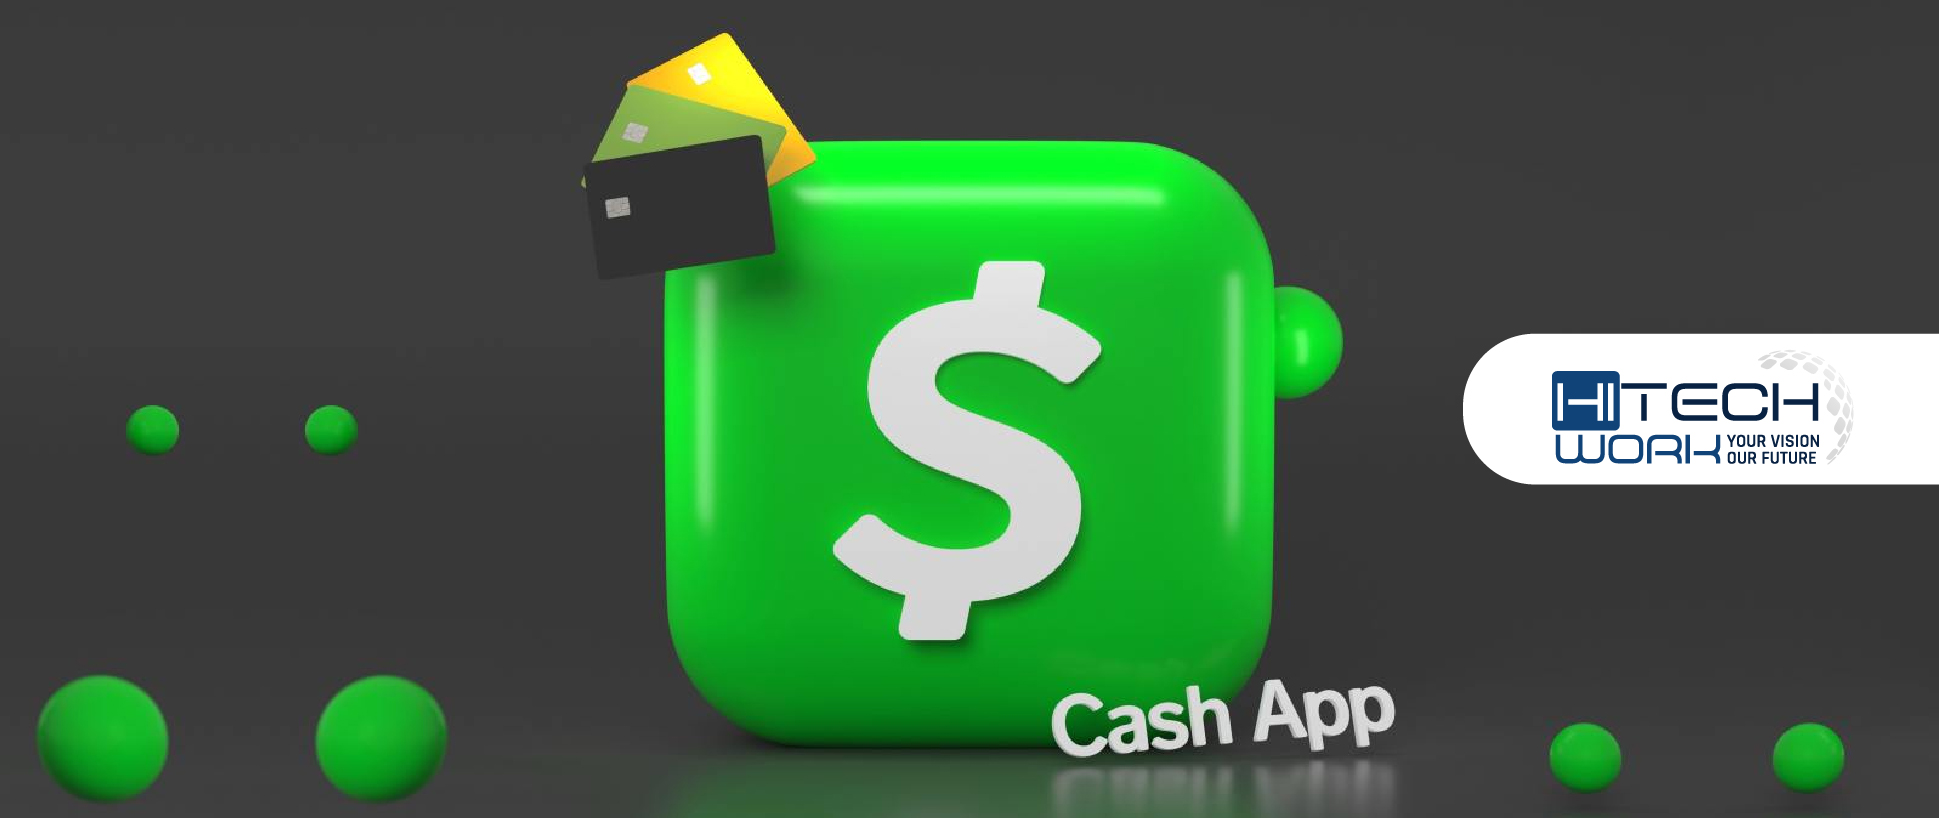 Where Can I Reload My Cash App Card for Free Simple Ways